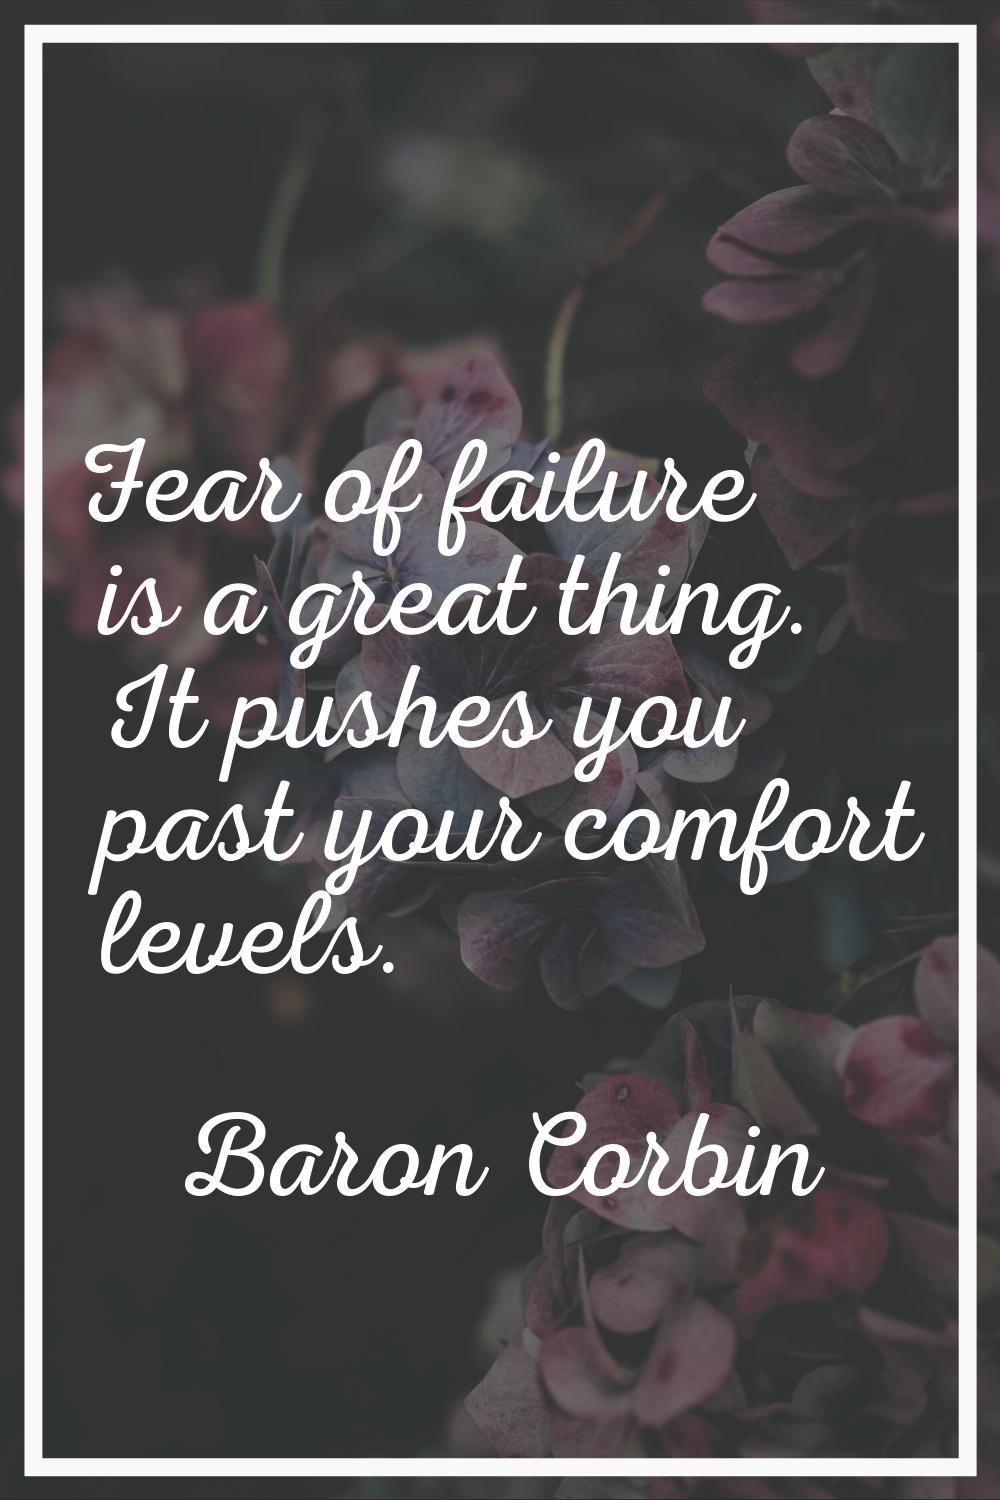 Fear of failure is a great thing. It pushes you past your comfort levels.